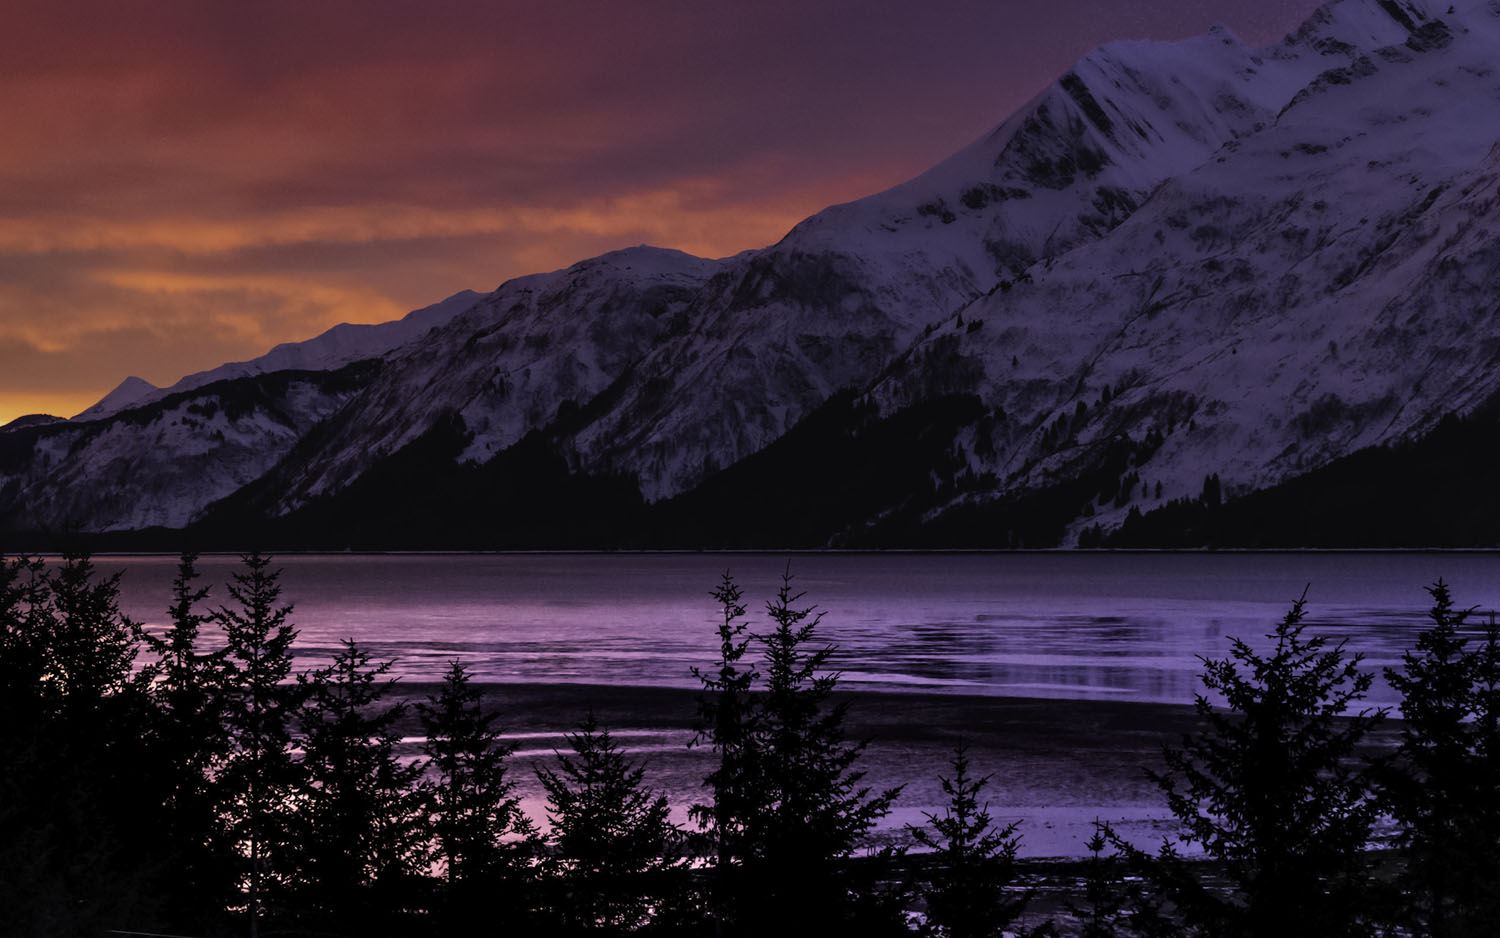 Relearning photography in a rural community of southeast Alaska